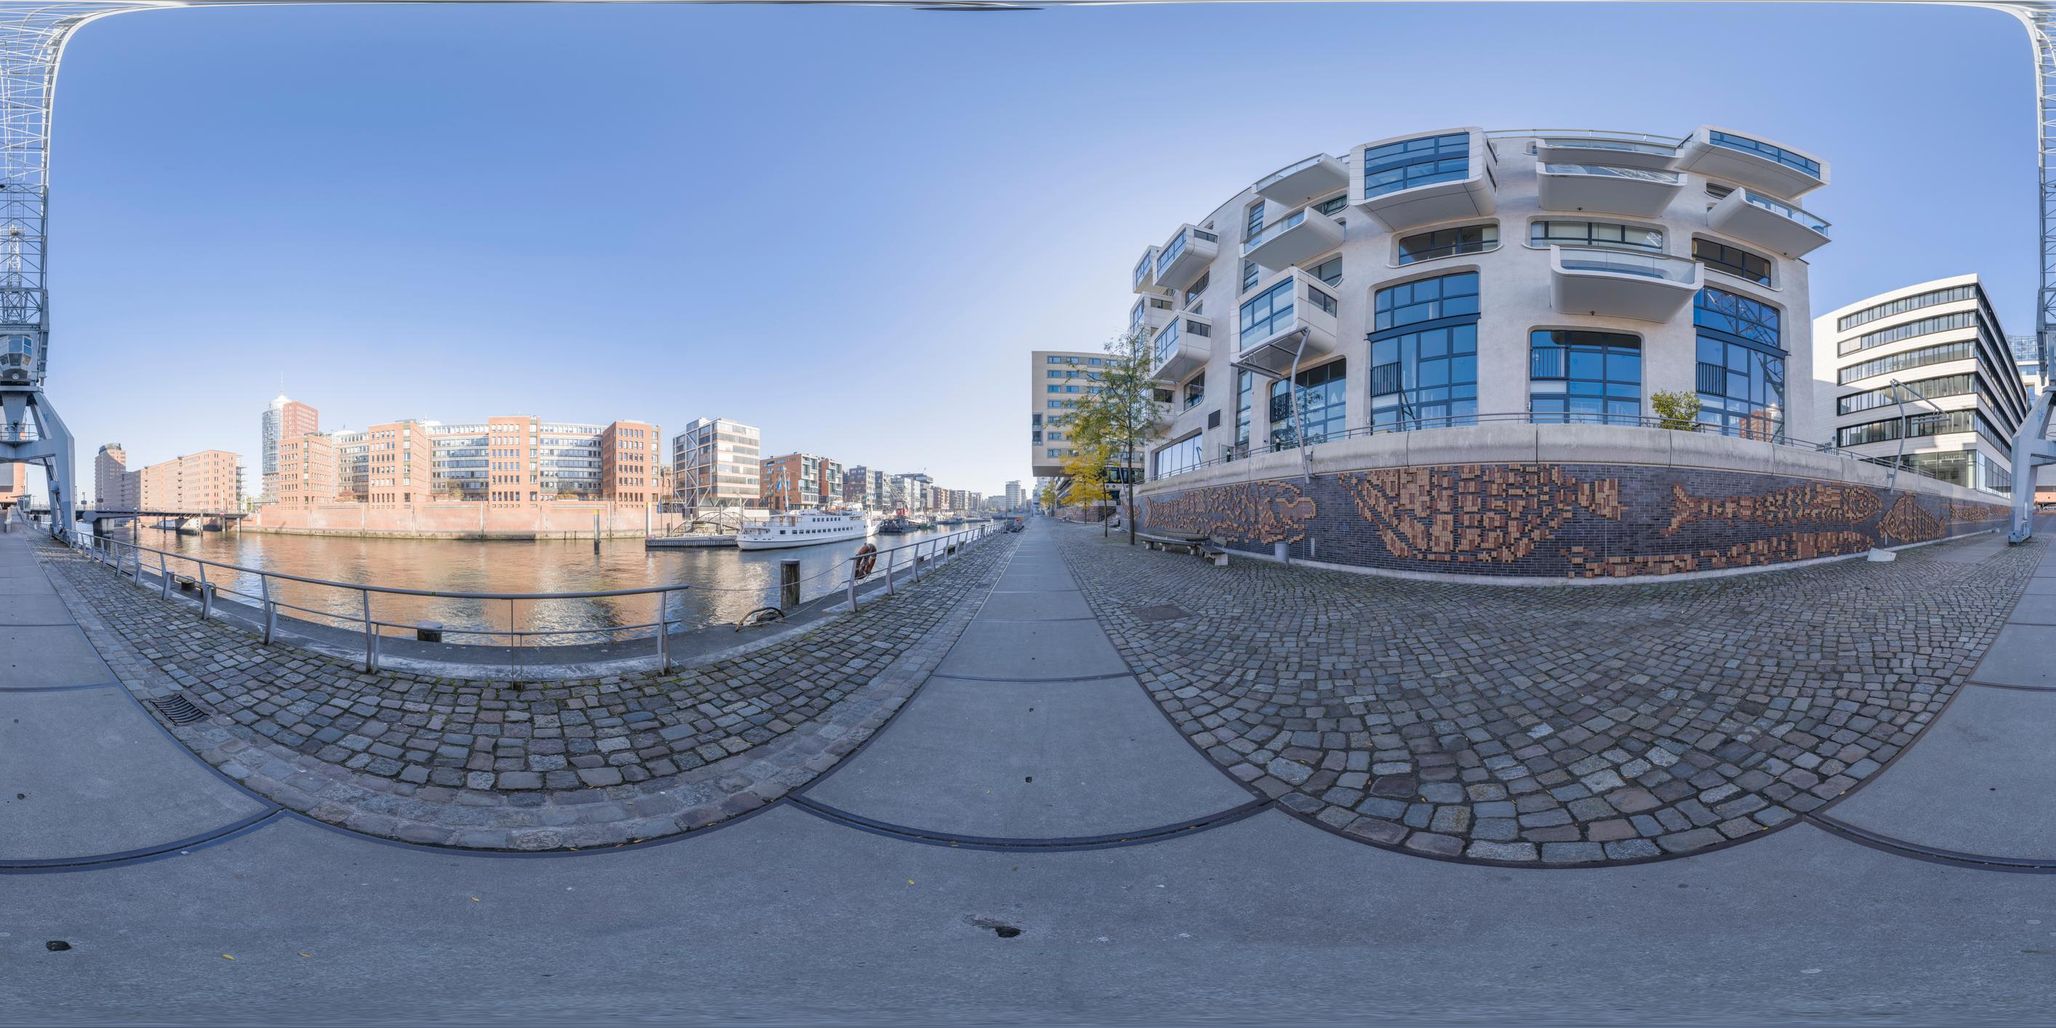 Straight Road in Hamburg, Germany Leads to a Picturesque Harbor - HDRi ...